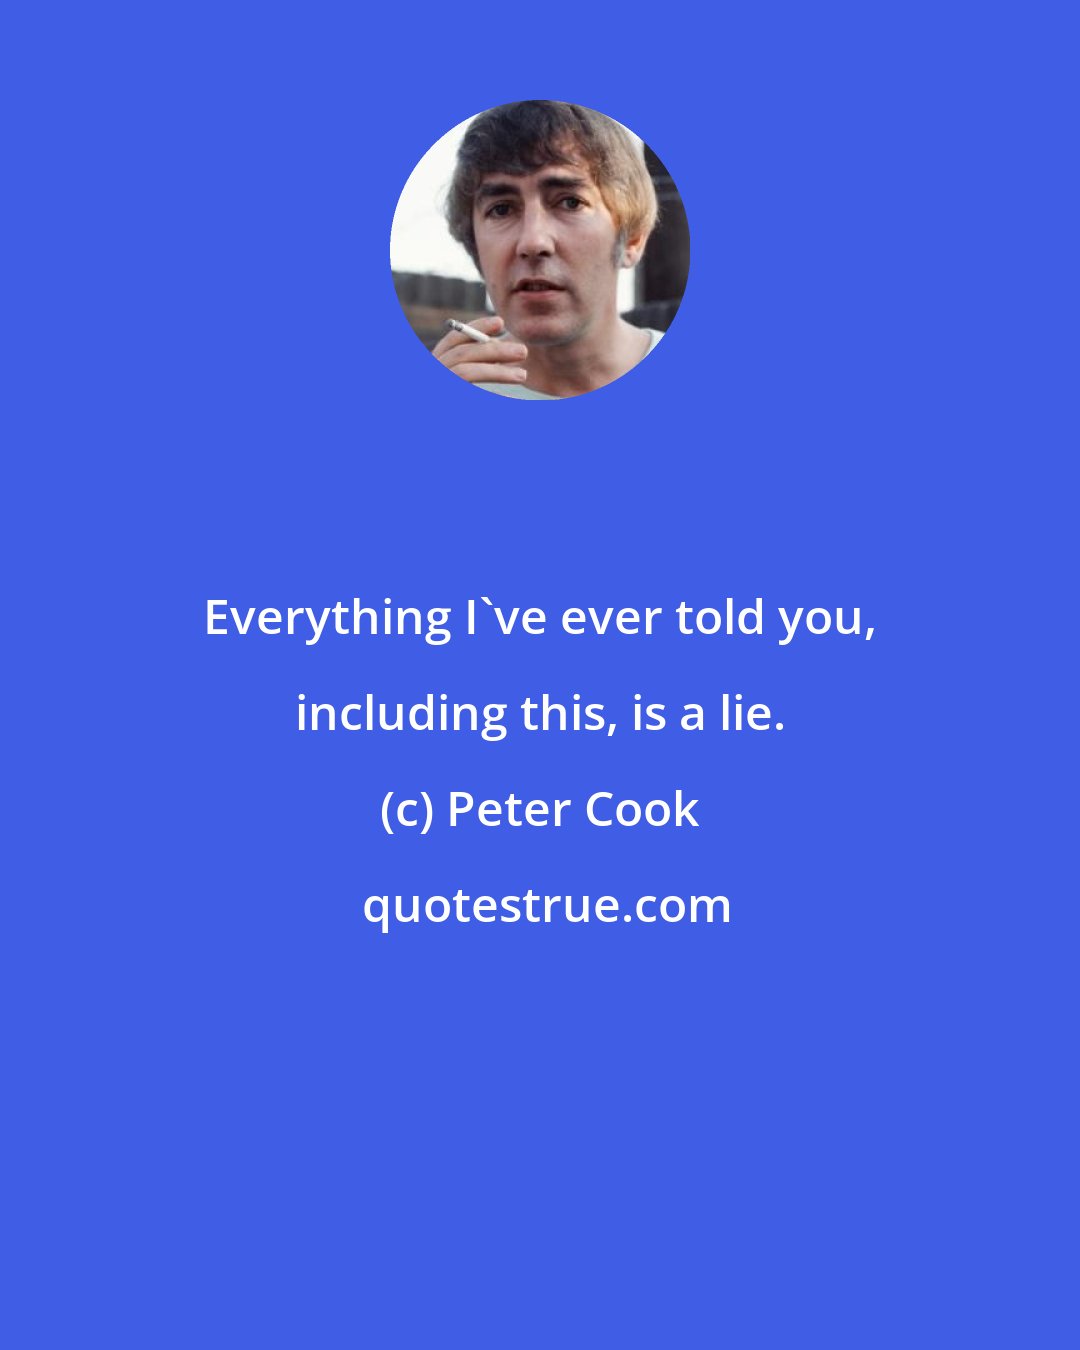 Peter Cook: Everything I've ever told you, including this, is a lie.